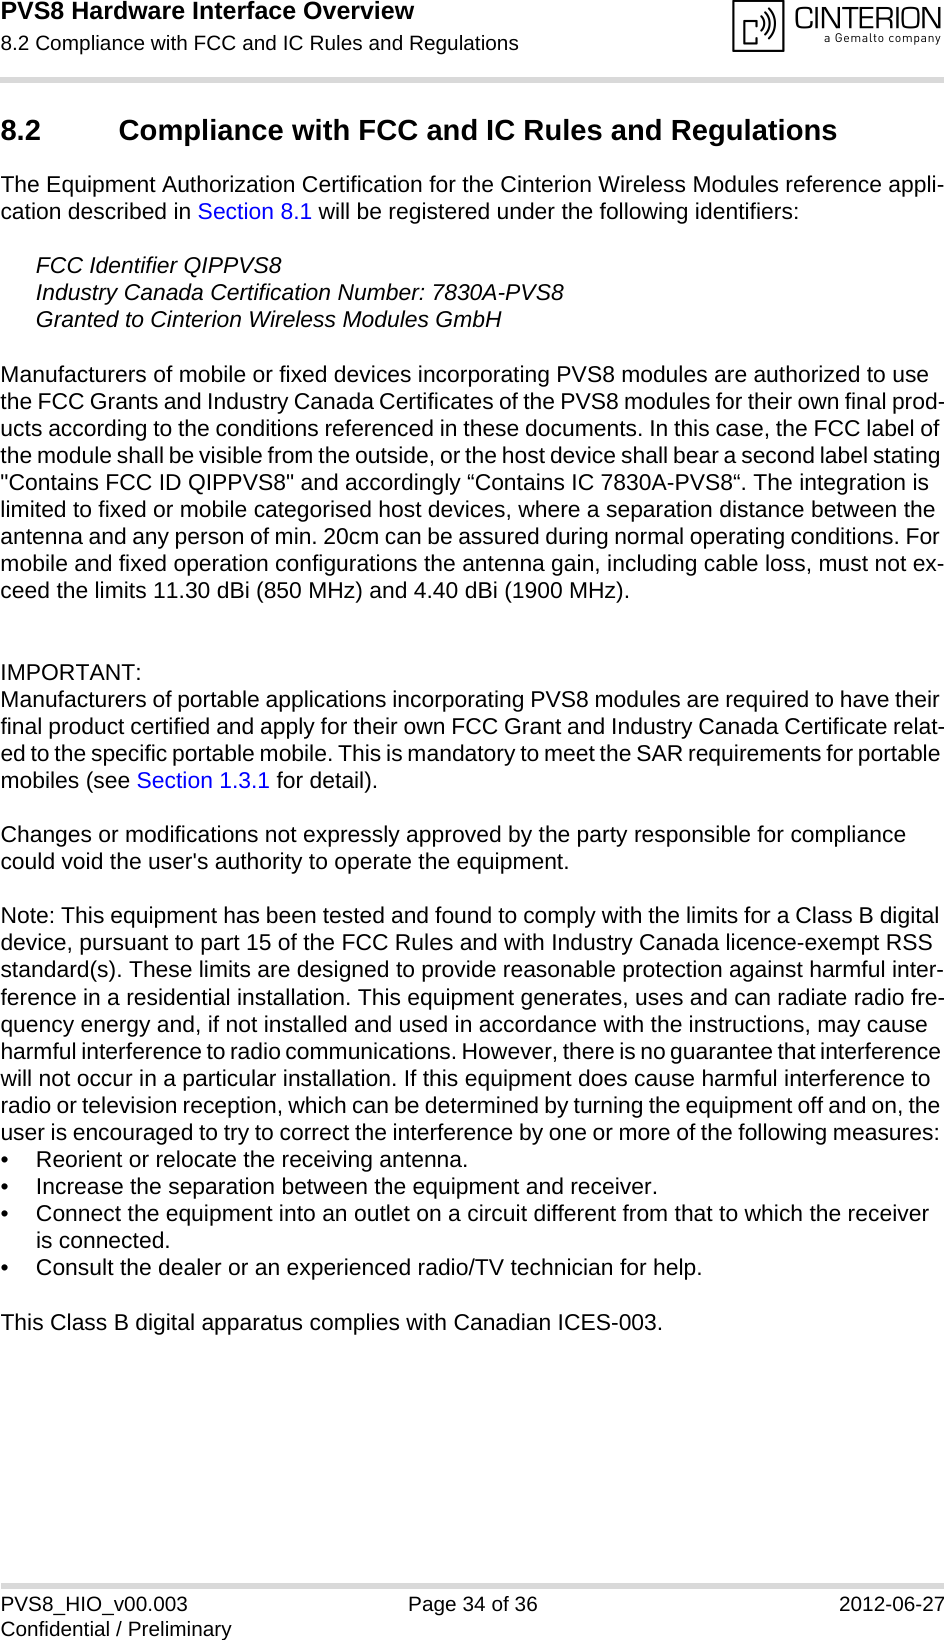 PVS8 Hardware Interface Overview8.2 Compliance with FCC and IC Rules and Regulations34PVS8_HIO_v00.003 Page 34 of 36 2012-06-27Confidential / Preliminary8.2 Compliance with FCC and IC Rules and Regulations The Equipment Authorization Certification for the Cinterion Wireless Modules reference appli-cation described in Section 8.1 will be registered under the following identifiers:FCC Identifier QIPPVS8Industry Canada Certification Number: 7830A-PVS8Granted to Cinterion Wireless Modules GmbH Manufacturers of mobile or fixed devices incorporating PVS8 modules are authorized to use the FCC Grants and Industry Canada Certificates of the PVS8 modules for their own final prod-ucts according to the conditions referenced in these documents. In this case, the FCC label of the module shall be visible from the outside, or the host device shall bear a second label stating &quot;Contains FCC ID QIPPVS8&quot; and accordingly “Contains IC 7830A-PVS8“. The integration is limited to fixed or mobile categorised host devices, where a separation distance between the antenna and any person of min. 20cm can be assured during normal operating conditions. For mobile and fixed operation configurations the antenna gain, including cable loss, must not ex-ceed the limits 11.30 dBi (850 MHz) and 4.40 dBi (1900 MHz).IMPORTANT:Manufacturers of portable applications incorporating PVS8 modules are required to have their final product certified and apply for their own FCC Grant and Industry Canada Certificate relat-ed to the specific portable mobile. This is mandatory to meet the SAR requirements for portable mobiles (see Section 1.3.1 for detail).Changes or modifications not expressly approved by the party responsible for compliance could void the user&apos;s authority to operate the equipment.Note: This equipment has been tested and found to comply with the limits for a Class B digital device, pursuant to part 15 of the FCC Rules and with Industry Canada licence-exempt RSS standard(s). These limits are designed to provide reasonable protection against harmful inter-ference in a residential installation. This equipment generates, uses and can radiate radio fre-quency energy and, if not installed and used in accordance with the instructions, may cause harmful interference to radio communications. However, there is no guarantee that interference will not occur in a particular installation. If this equipment does cause harmful interference to radio or television reception, which can be determined by turning the equipment off and on, the user is encouraged to try to correct the interference by one or more of the following measures: • Reorient or relocate the receiving antenna. • Increase the separation between the equipment and receiver. • Connect the equipment into an outlet on a circuit different from that to which the receiver is connected. • Consult the dealer or an experienced radio/TV technician for help.This Class B digital apparatus complies with Canadian ICES-003.